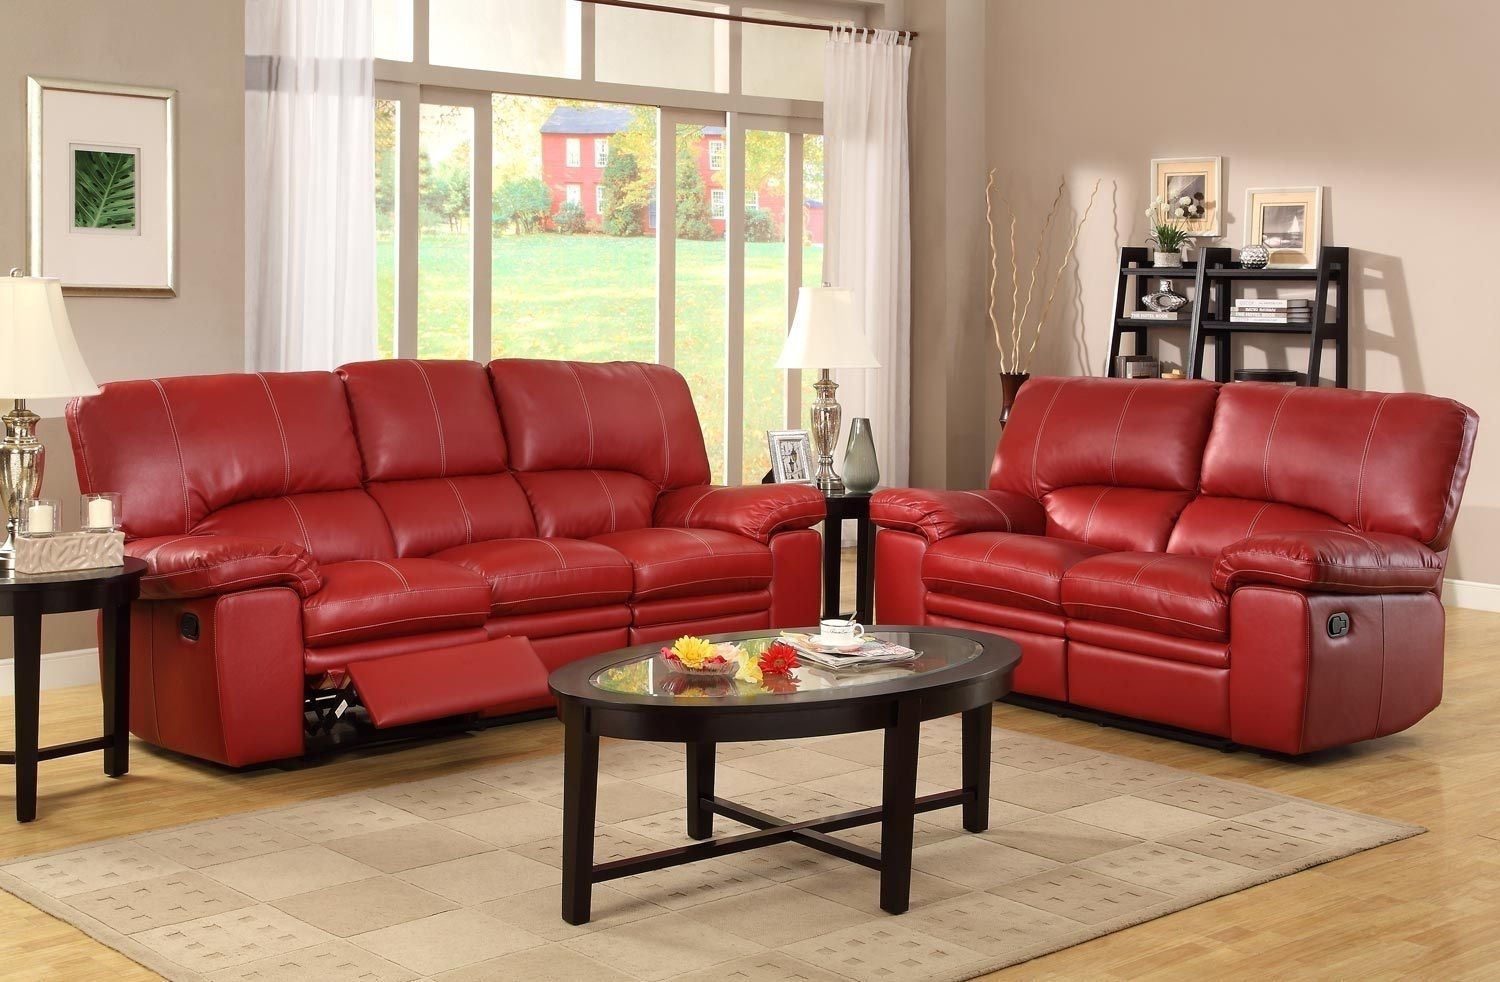 Make A Bold Statement In Your Living Area With 2016 Red Leather Sofa Within Red Leather Reclining Sofas And Loveseats (View 3 of 15)